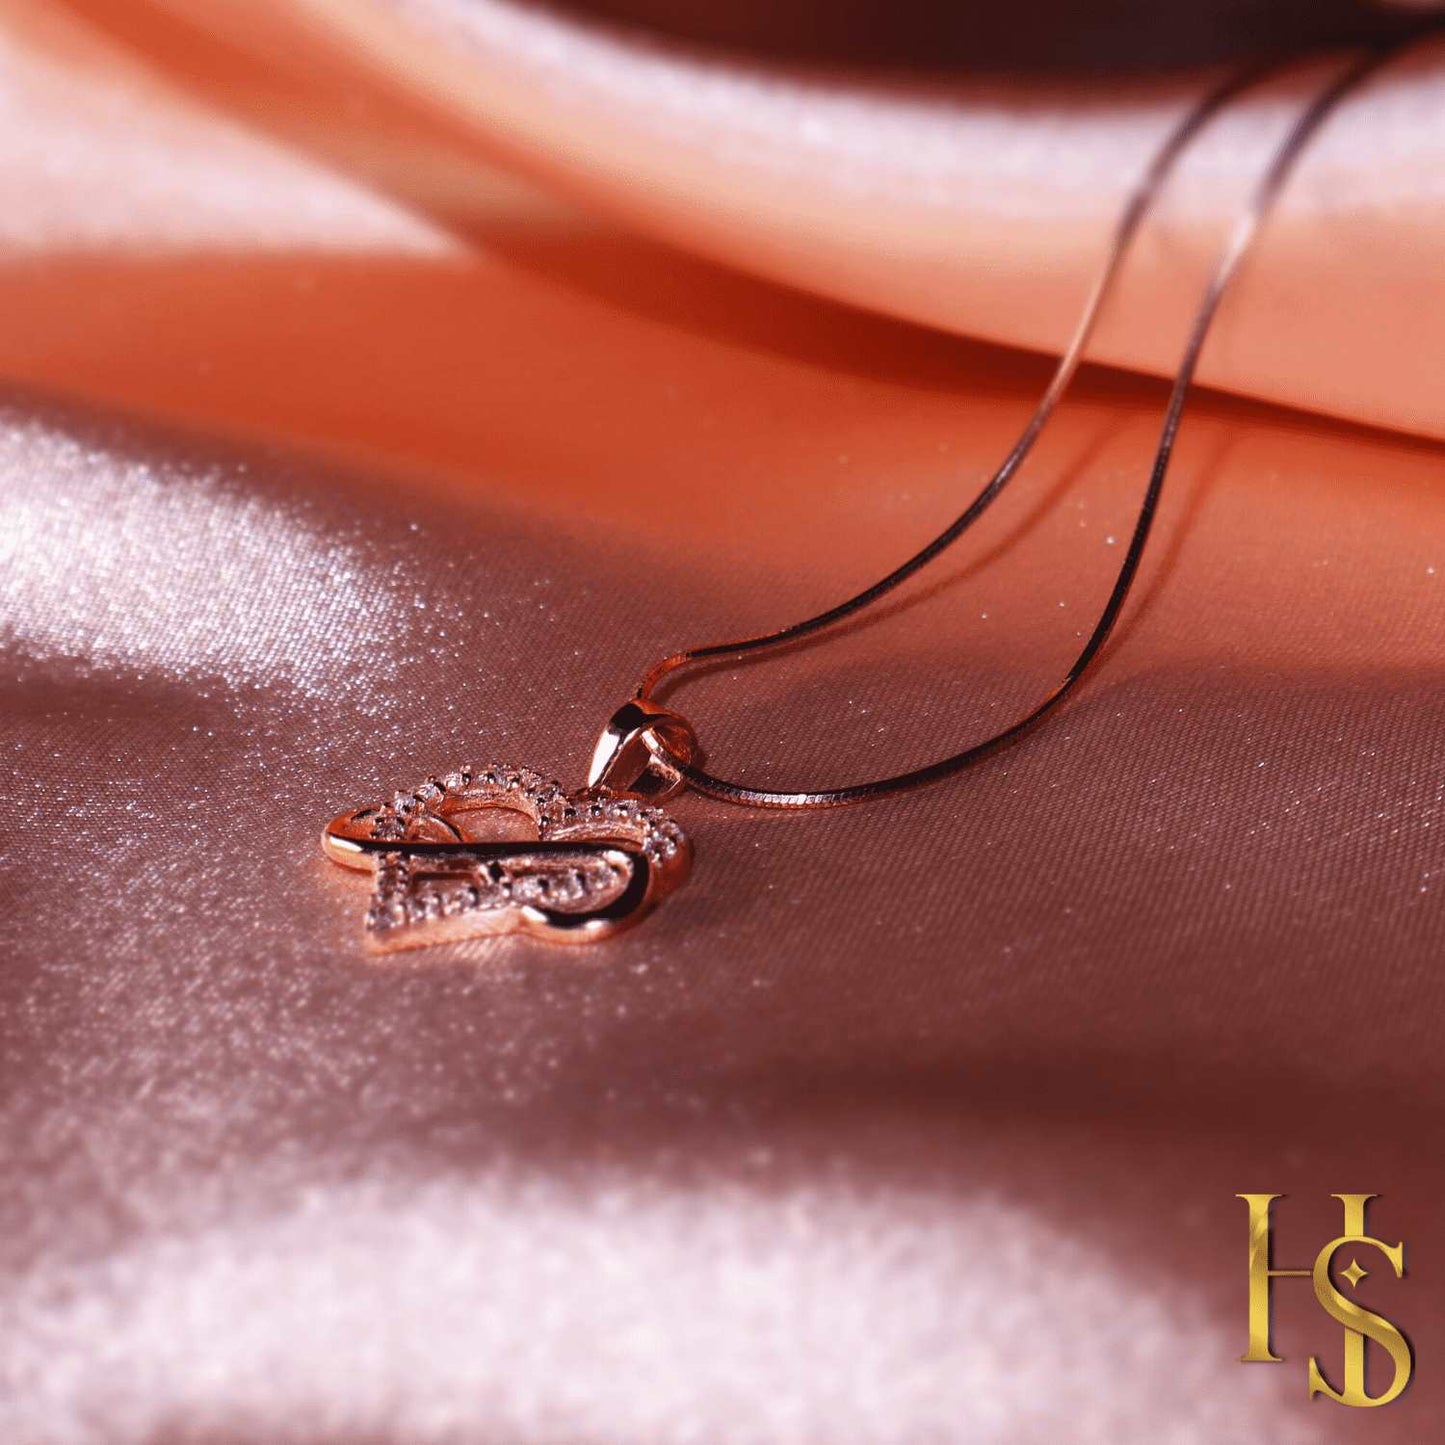 Infinity Heart Rose Gold Pendant in 92.5 Silver - Infinite Love - Studded with Swiss Zirconia - 18K Rose Gold finish